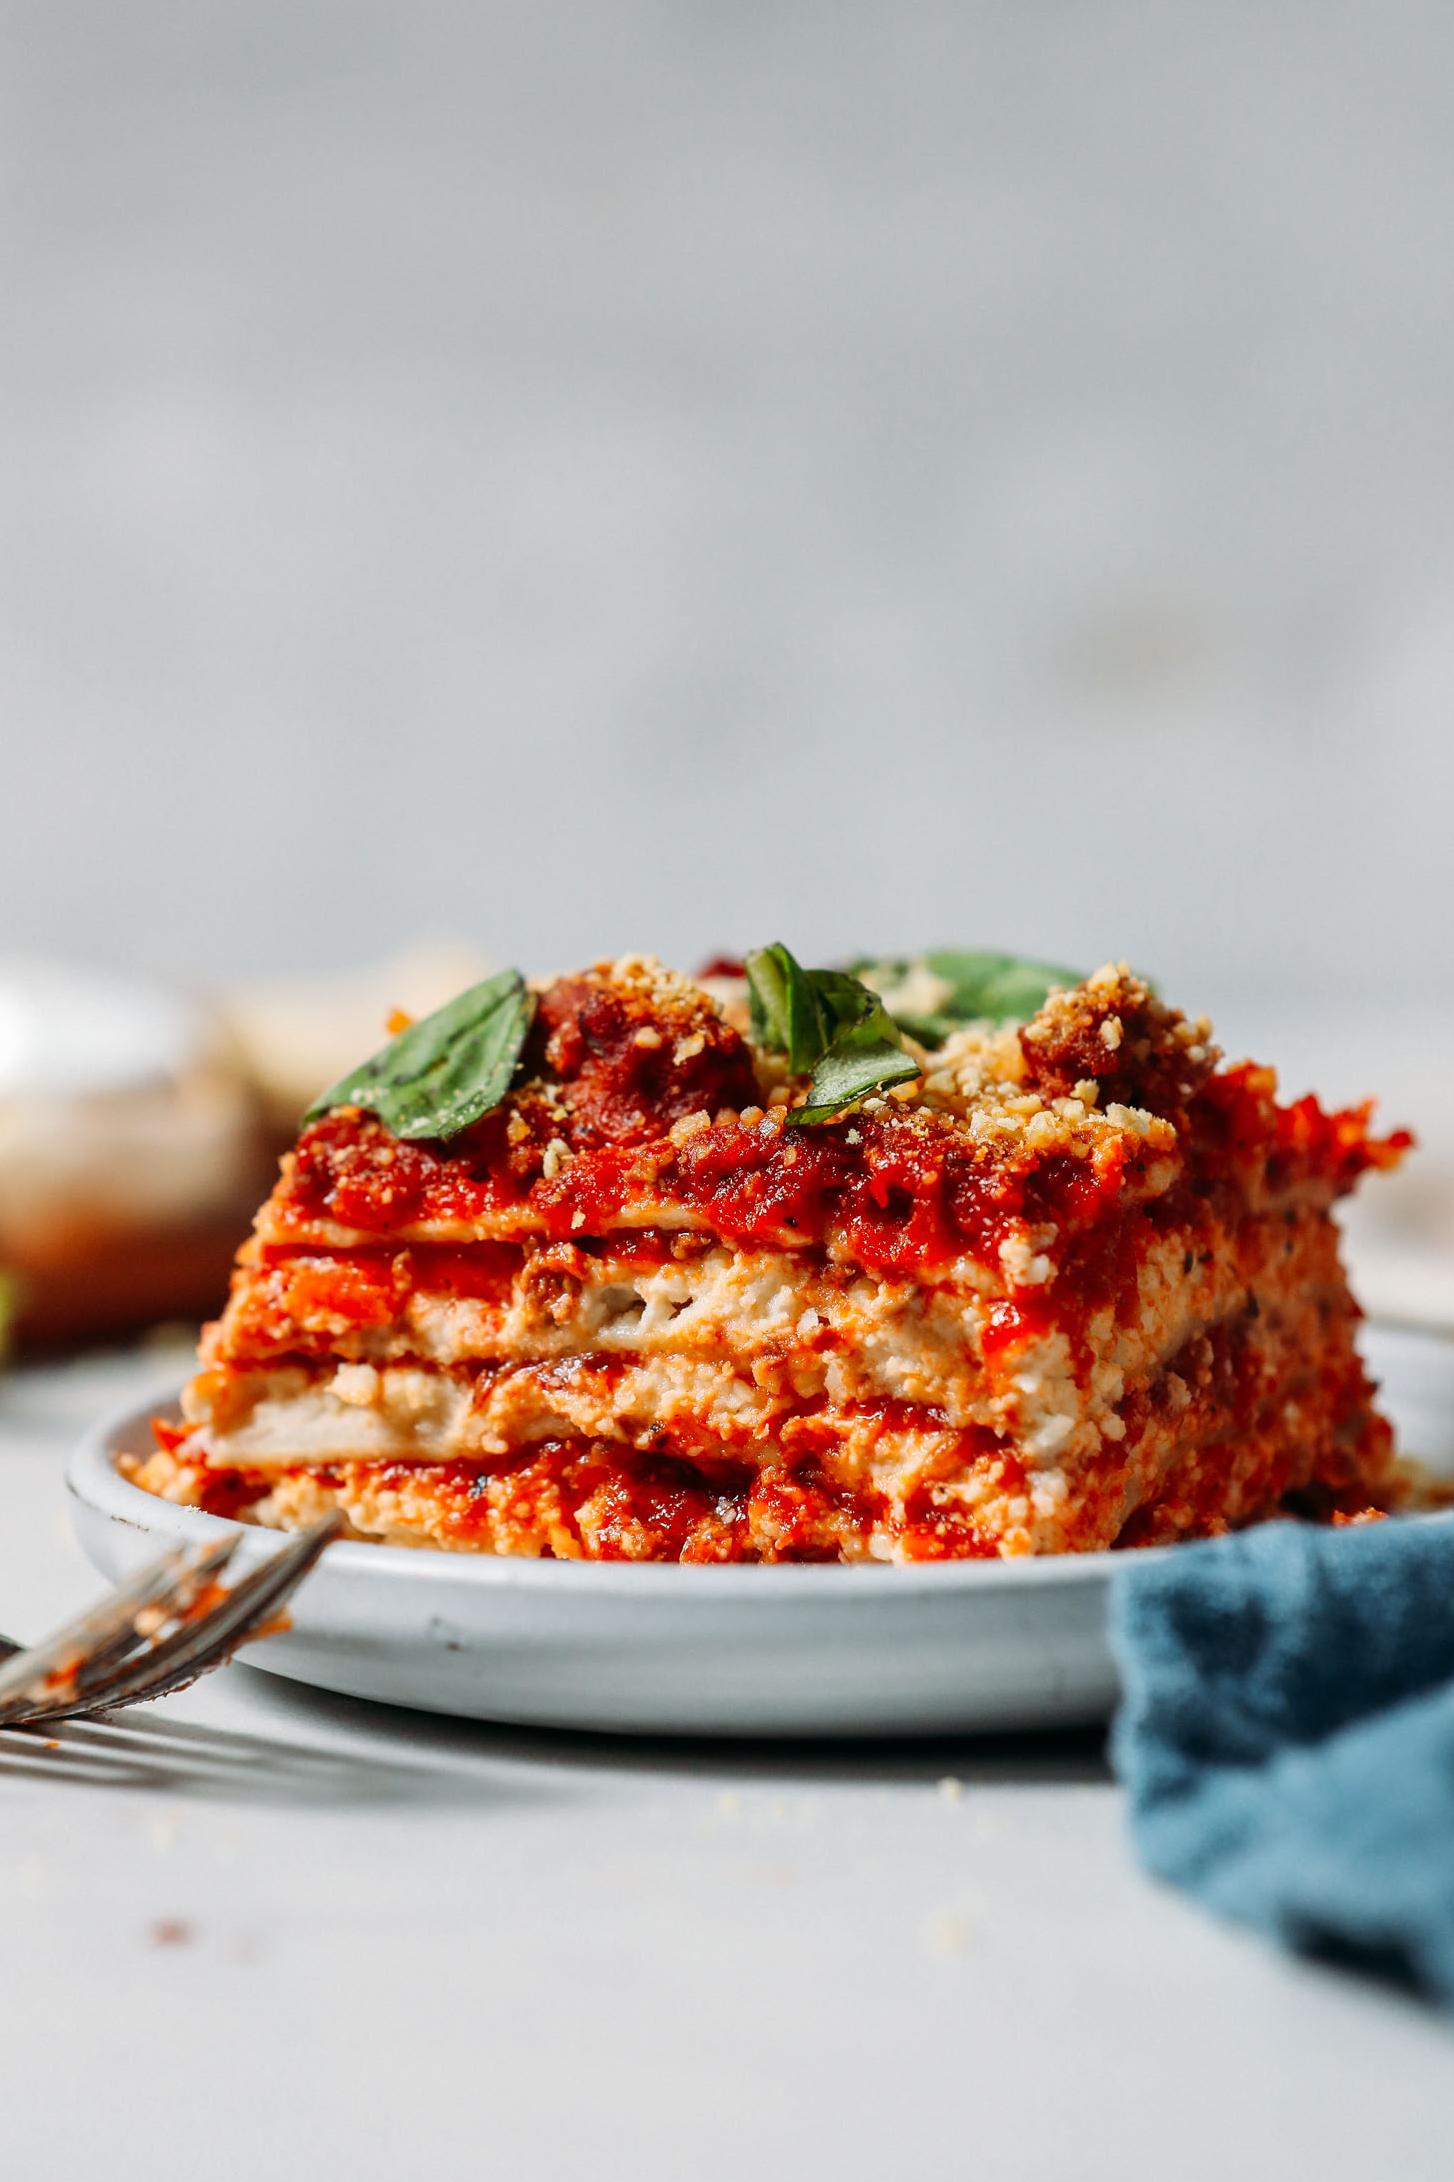  Say goodbye to boring salads and indulge in this vegetable-packed lasagna that hits all the right notes of savory, sweet, and slightly tangy.